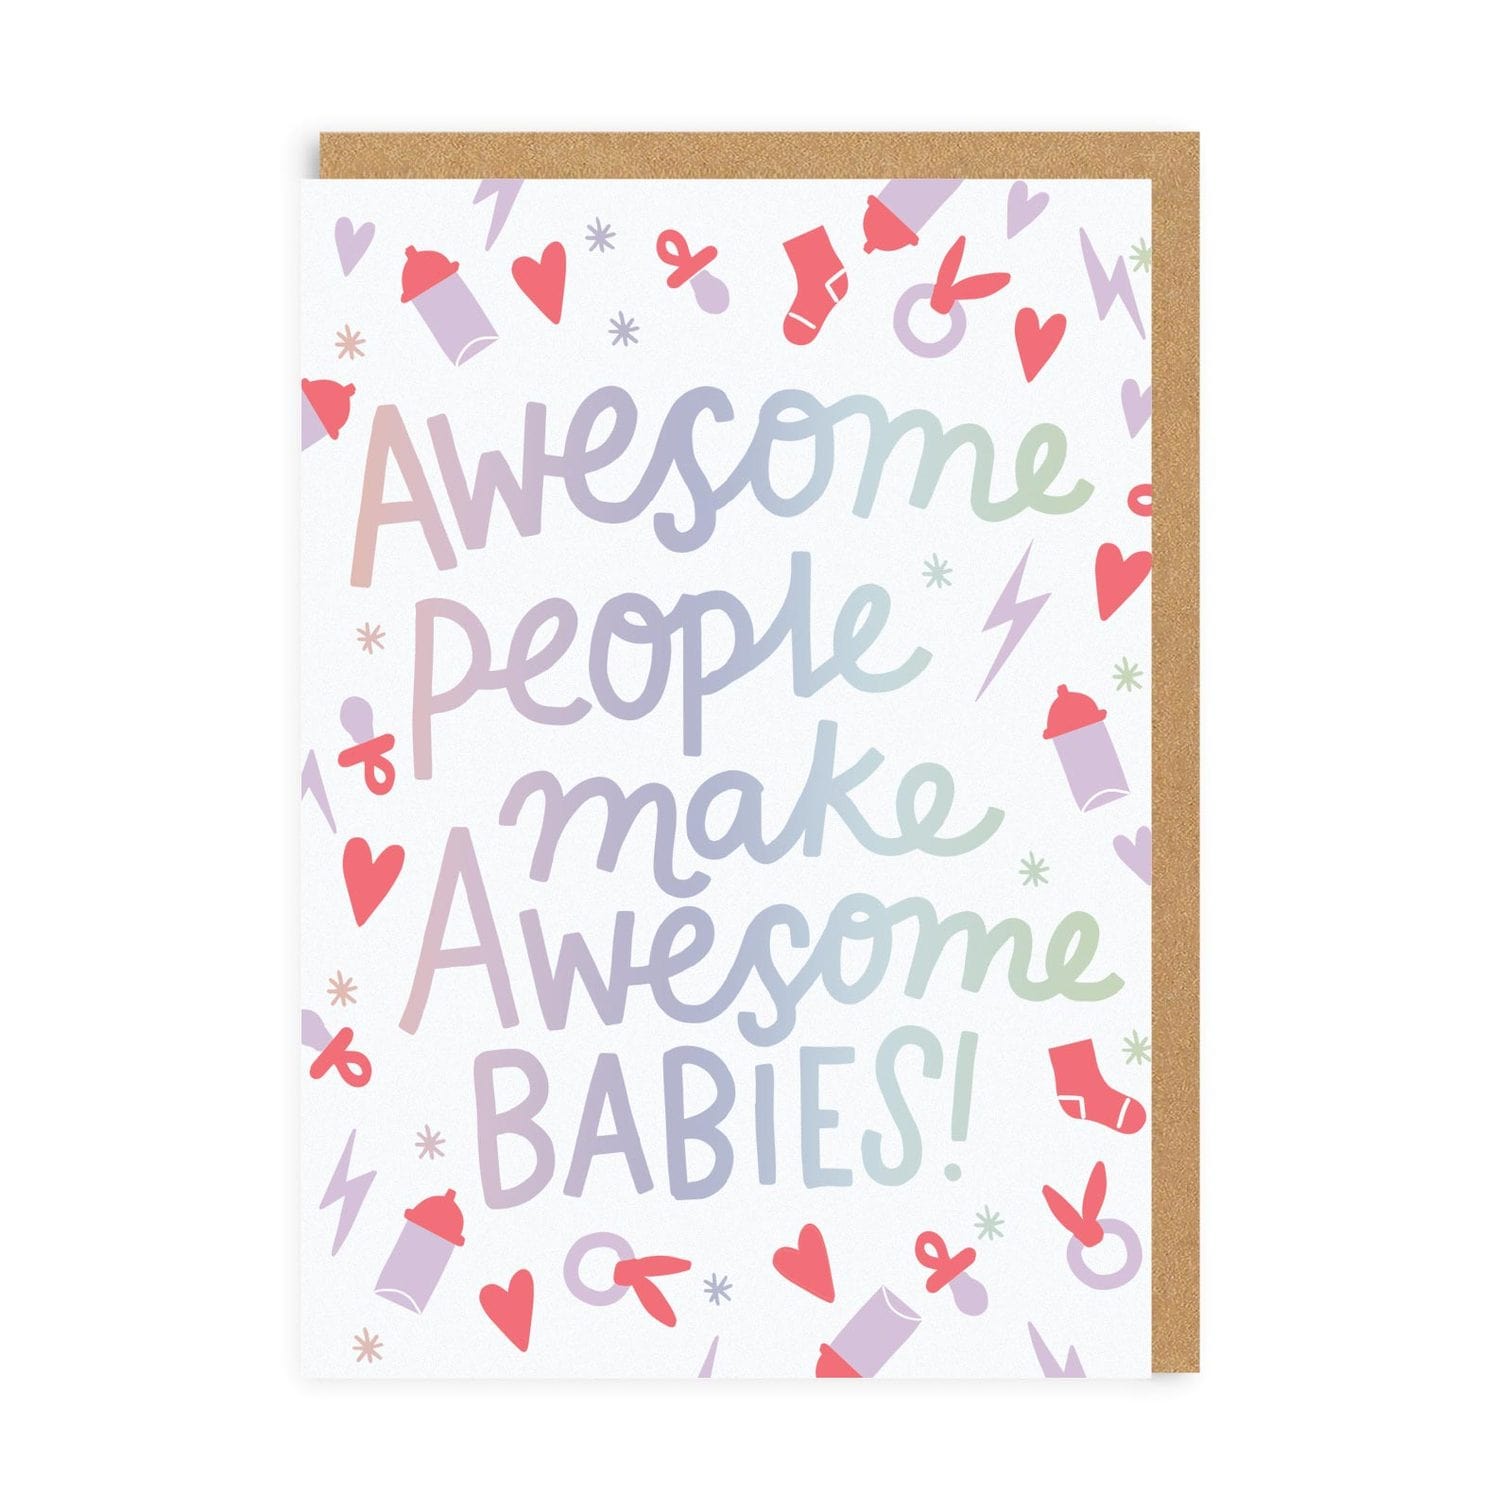 Awesome Babies Greeting Card